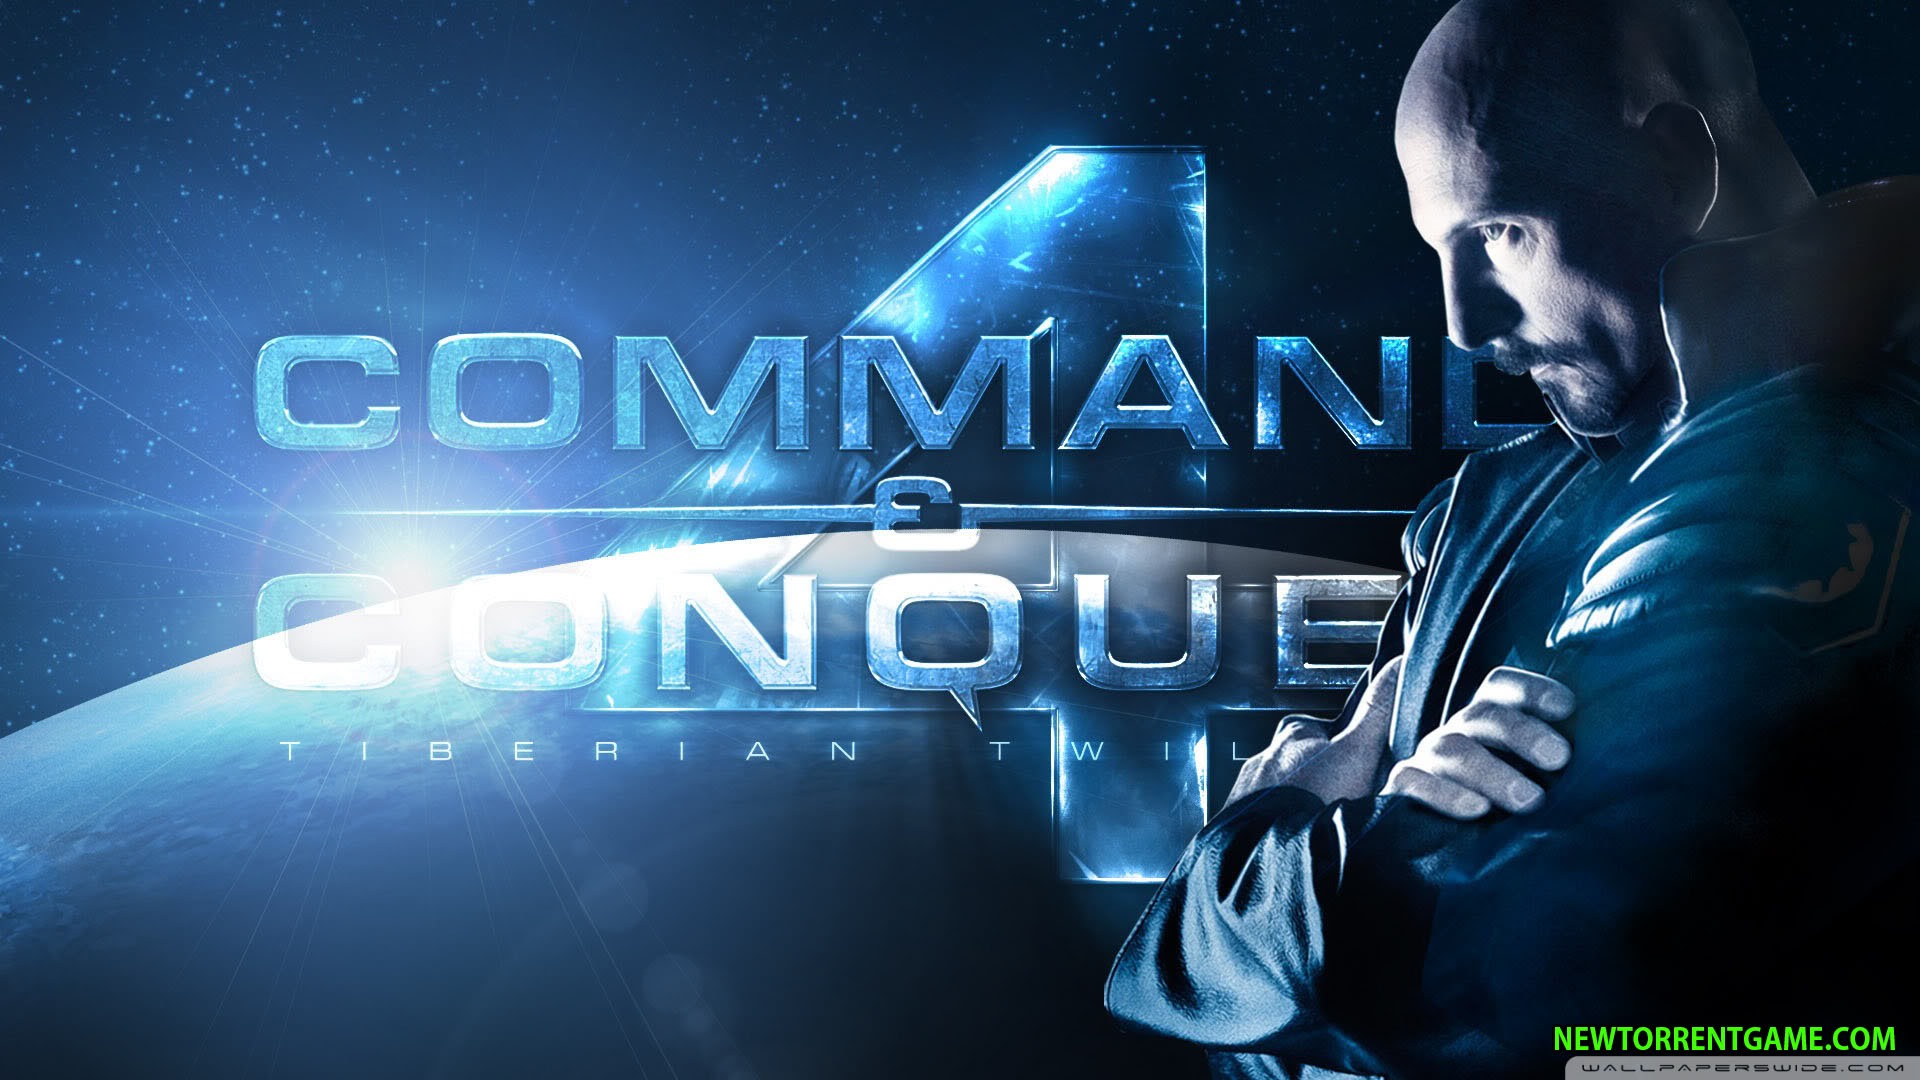 Descargar Command And Conquer The Ultimate Collection Torrent.rar